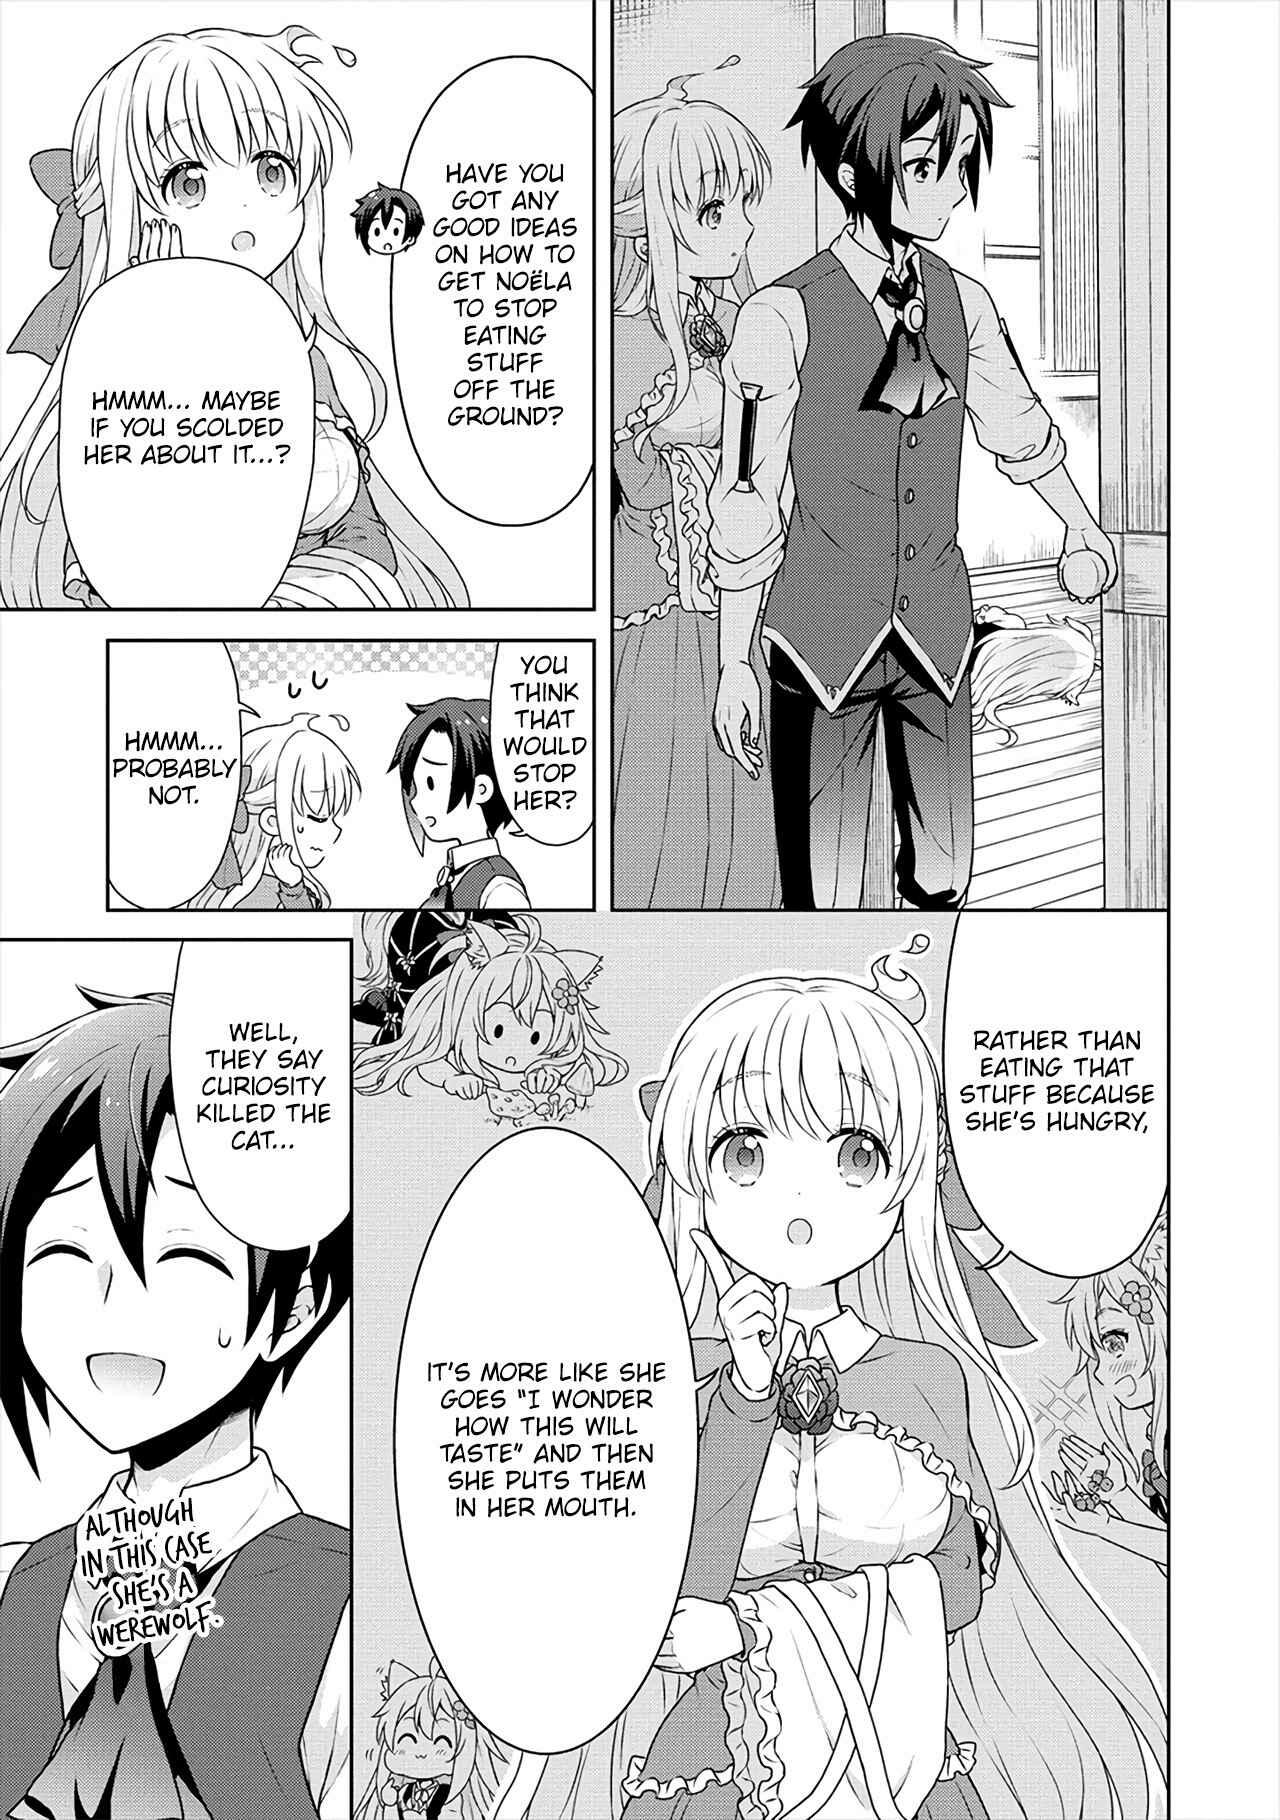 30 How NOT to Summon A Demon Lord ideas